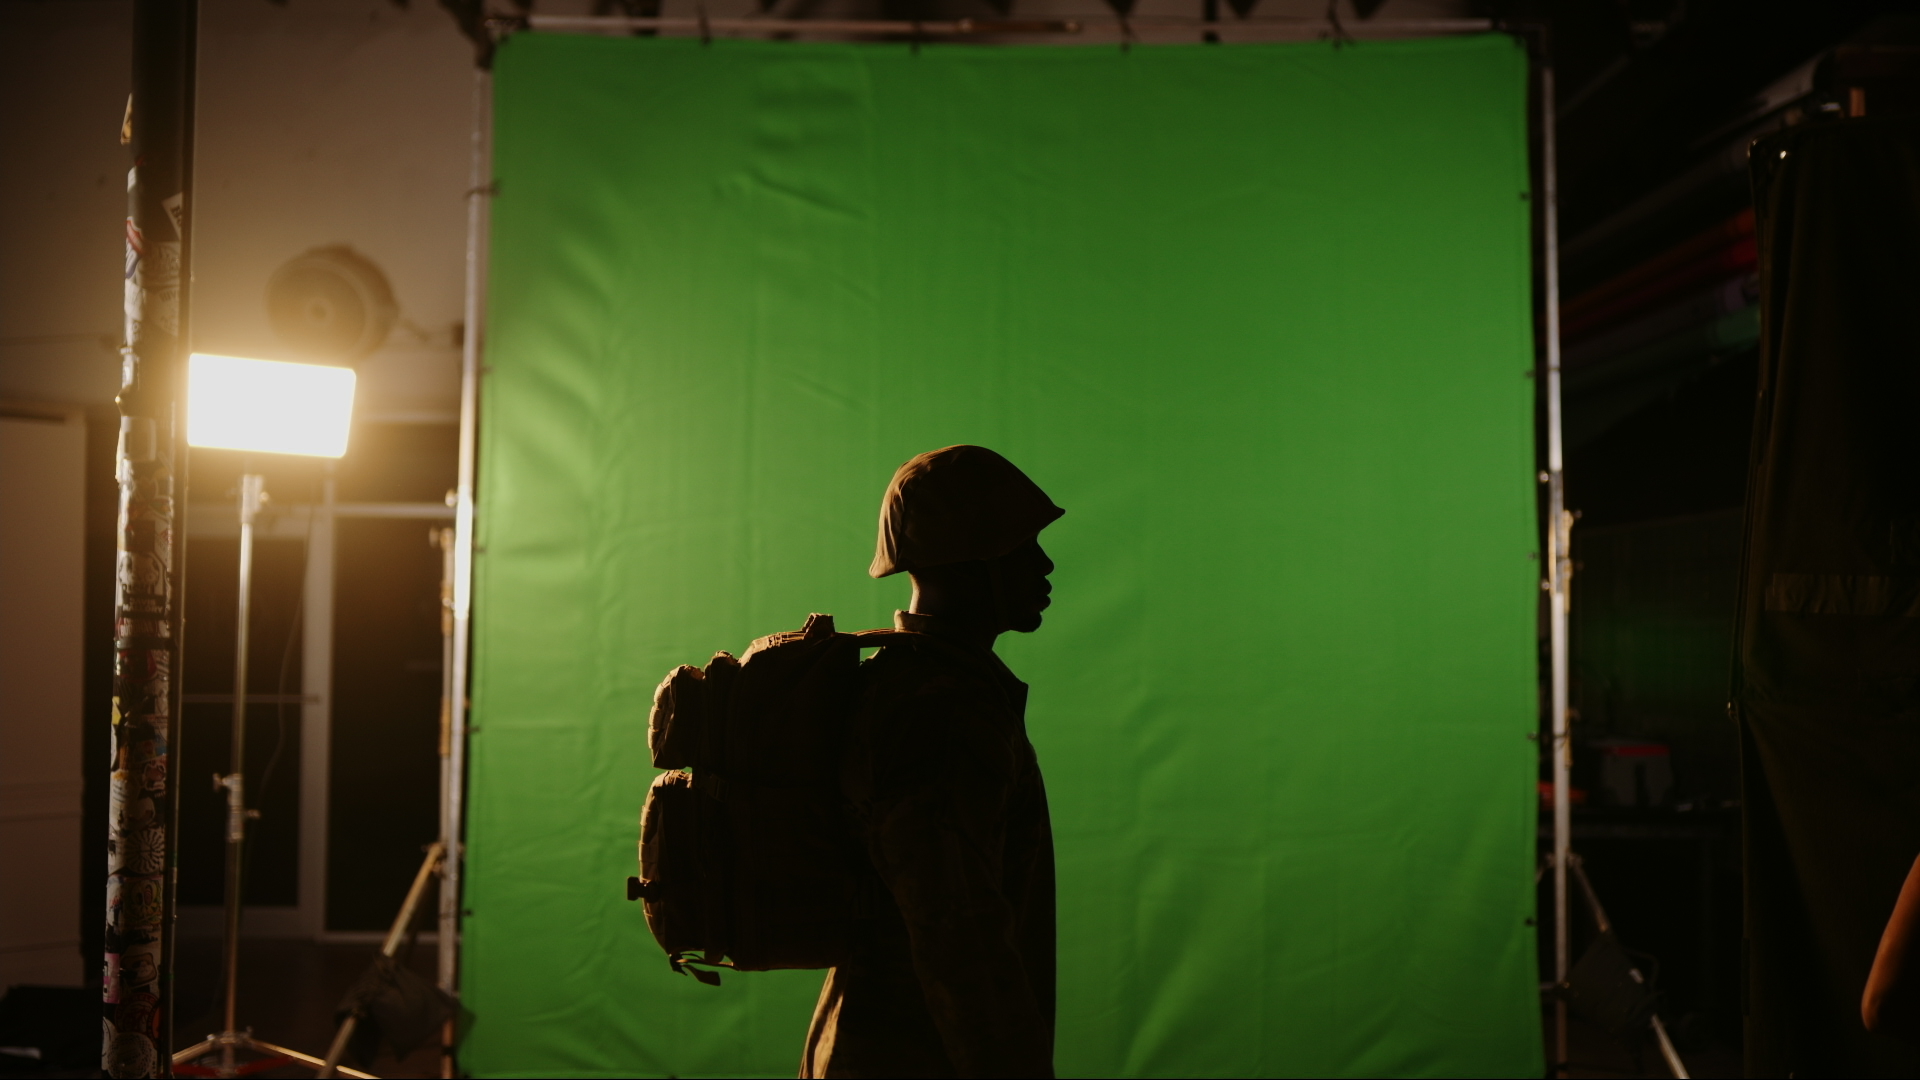 Tips for Shooting Video on Green Screen Side profile silhouette of a soldier wearing gear and a backpack standing in front of a green backdrop